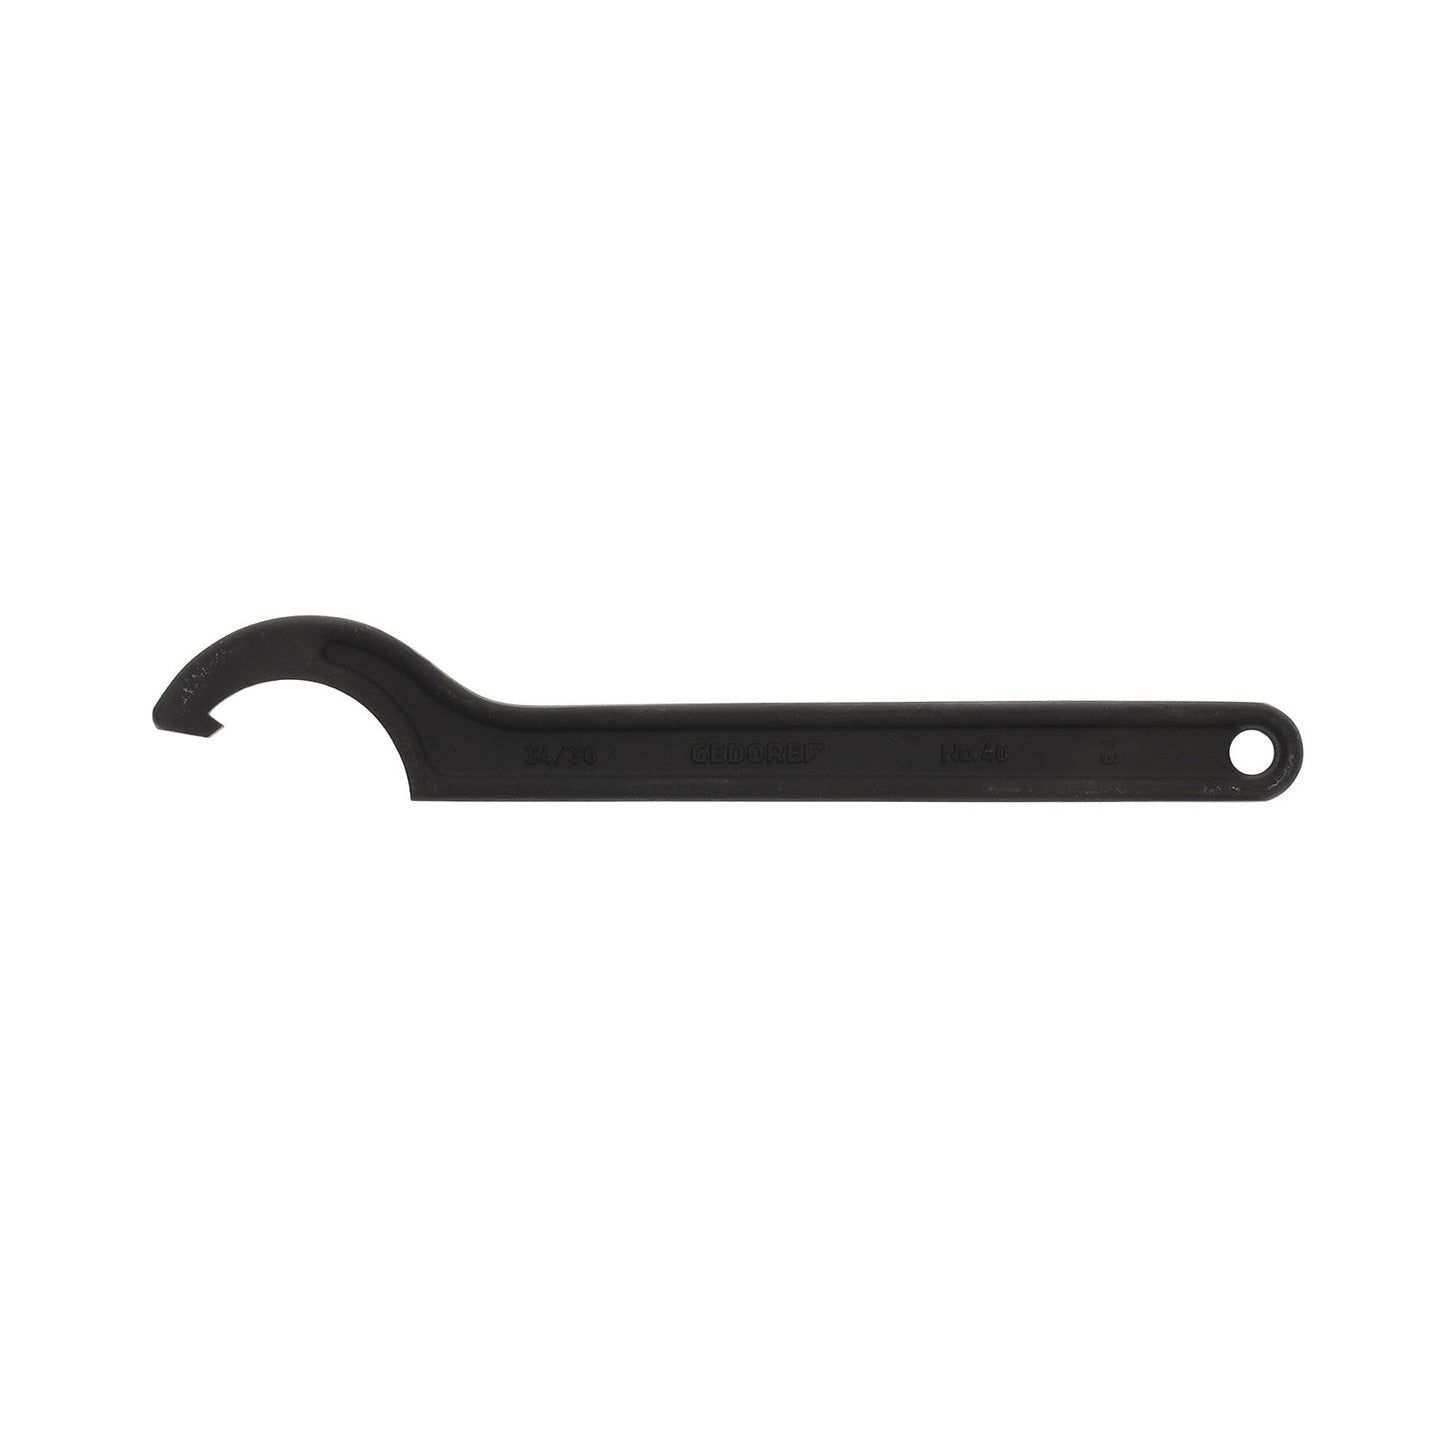 GEDORE 40 34-36 - Hook Wrench, 34-36 (6334290)